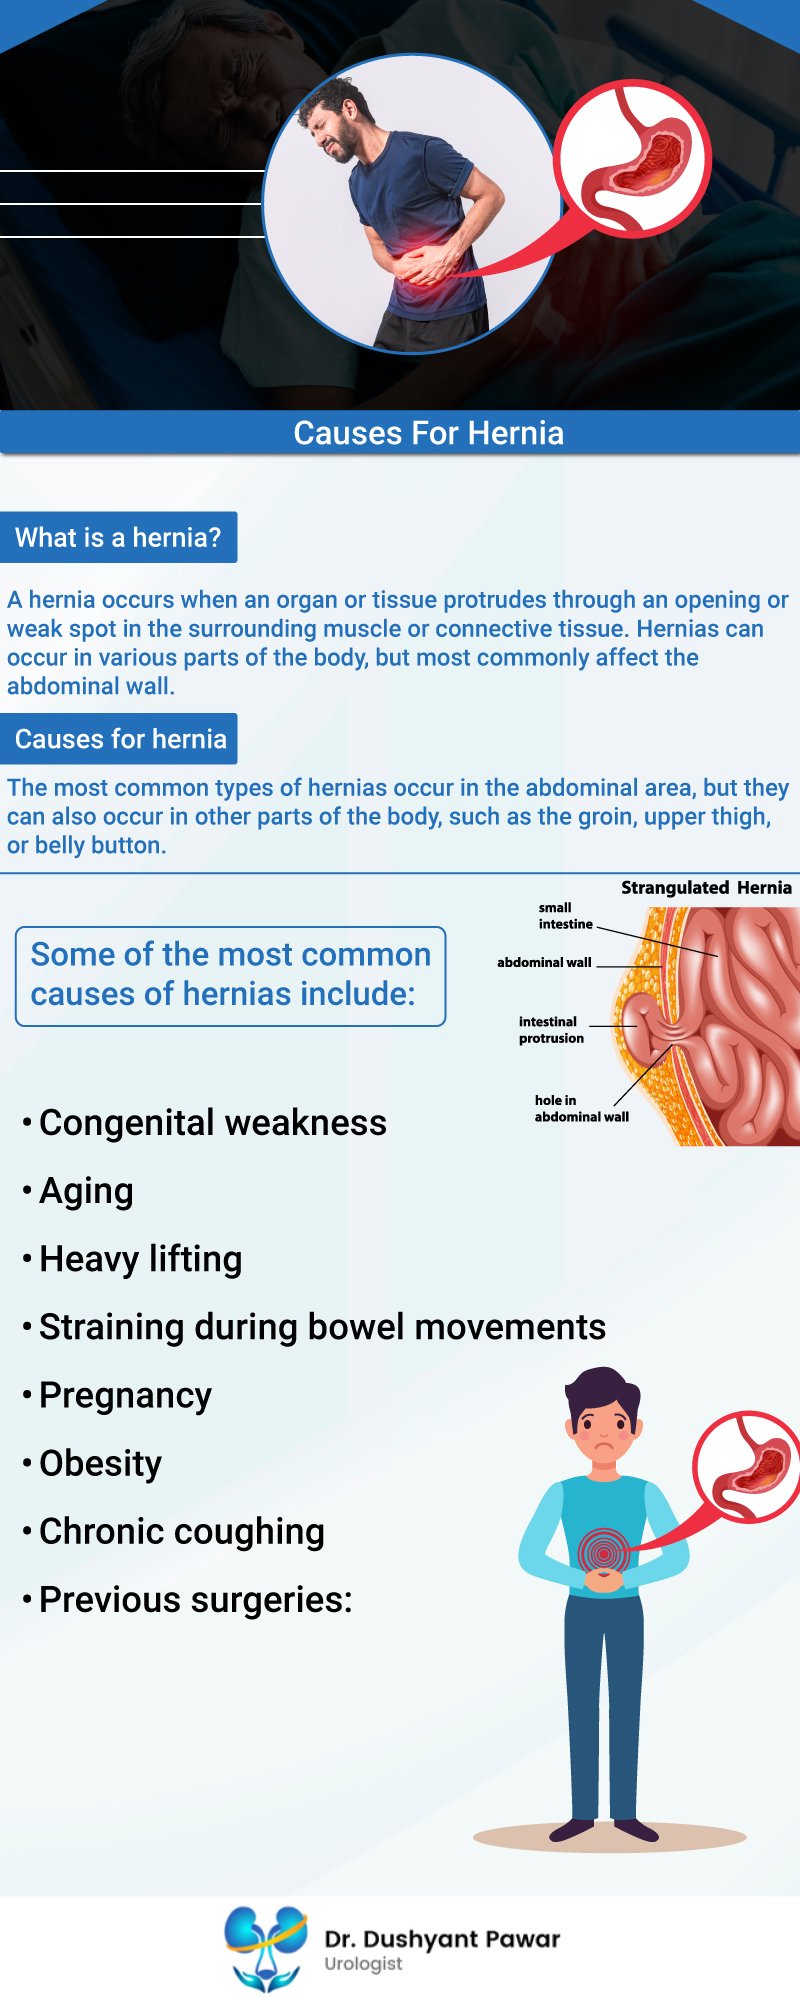 causes of hernia image